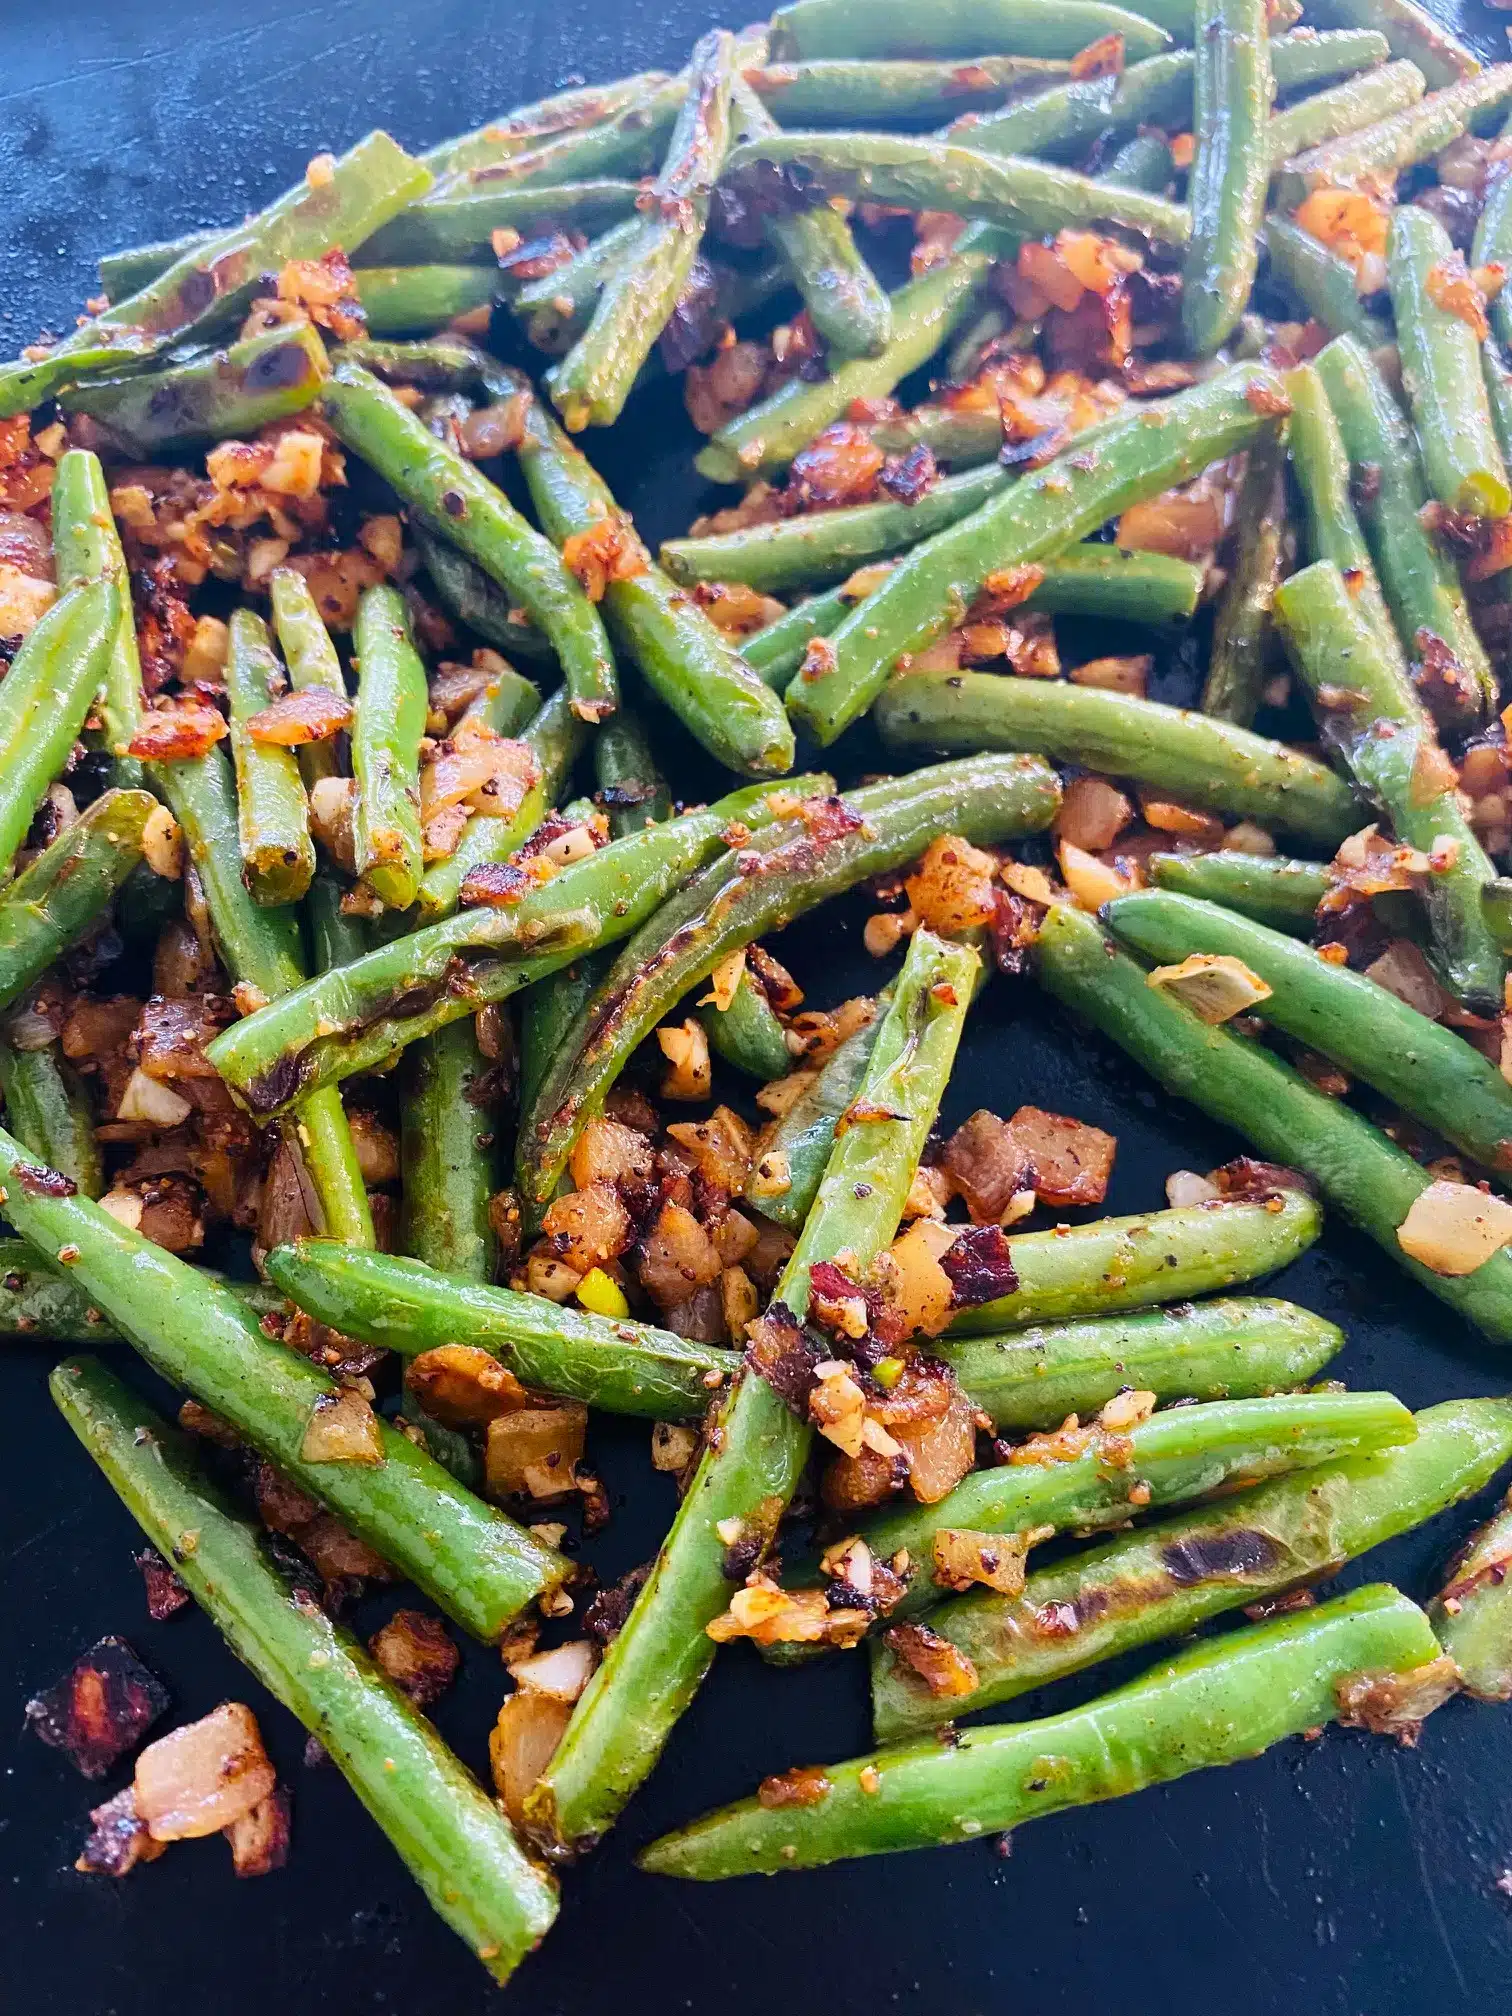 Green beans cooking on a griddle.